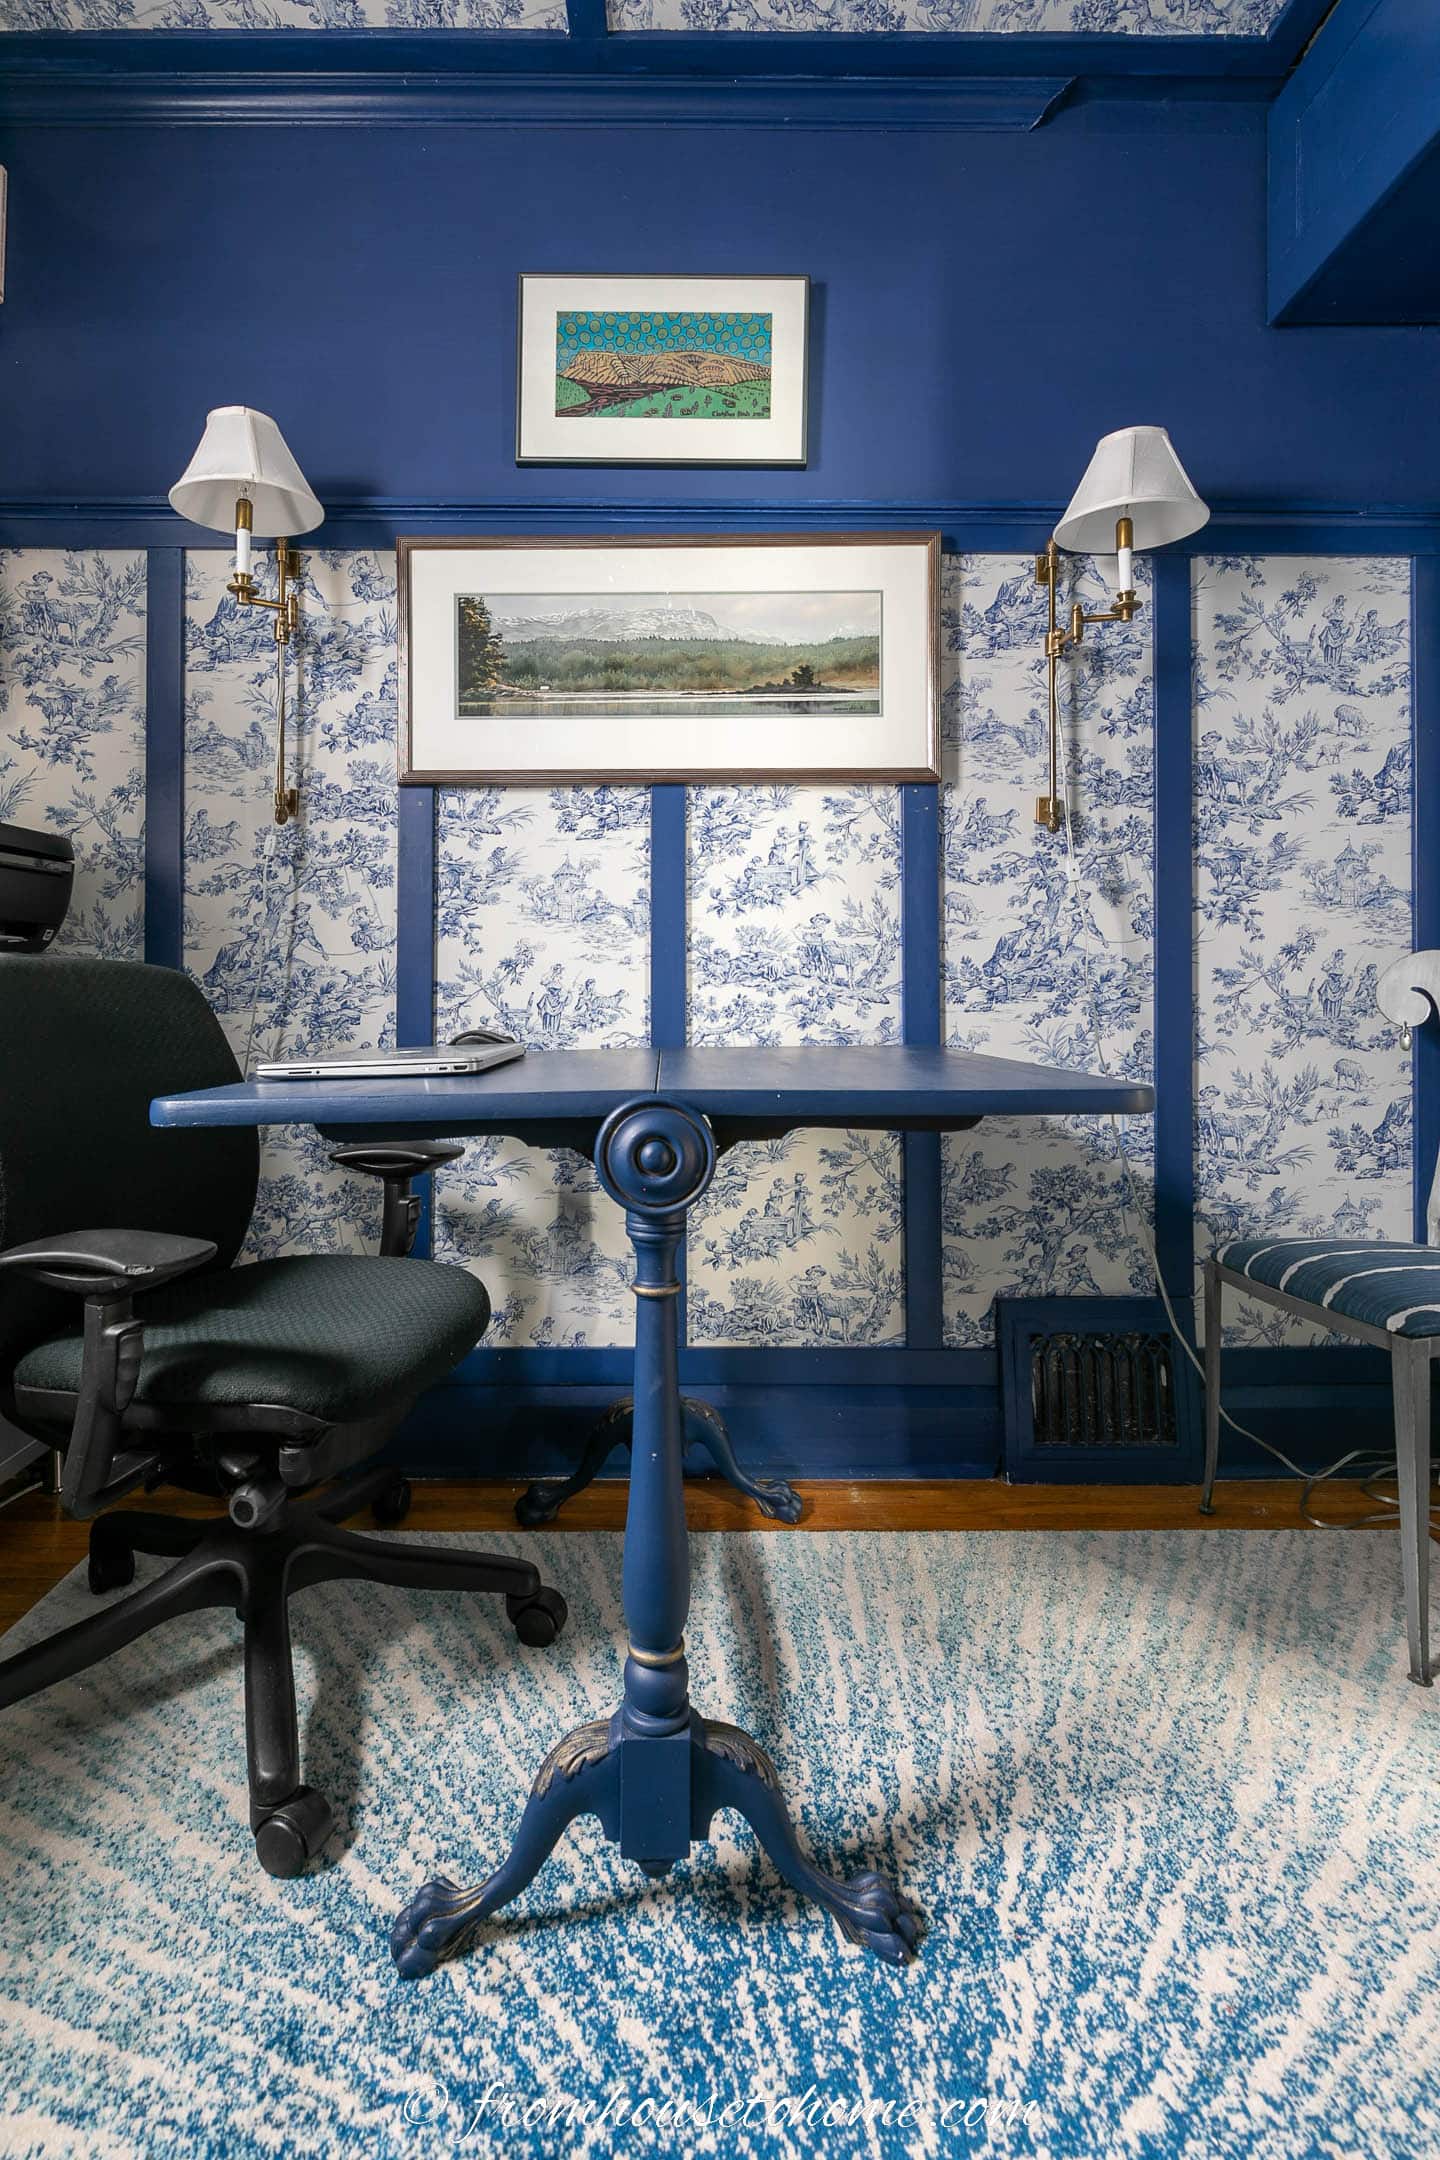 Blu drop leaf table in a small home office with board and batten blue and white walls